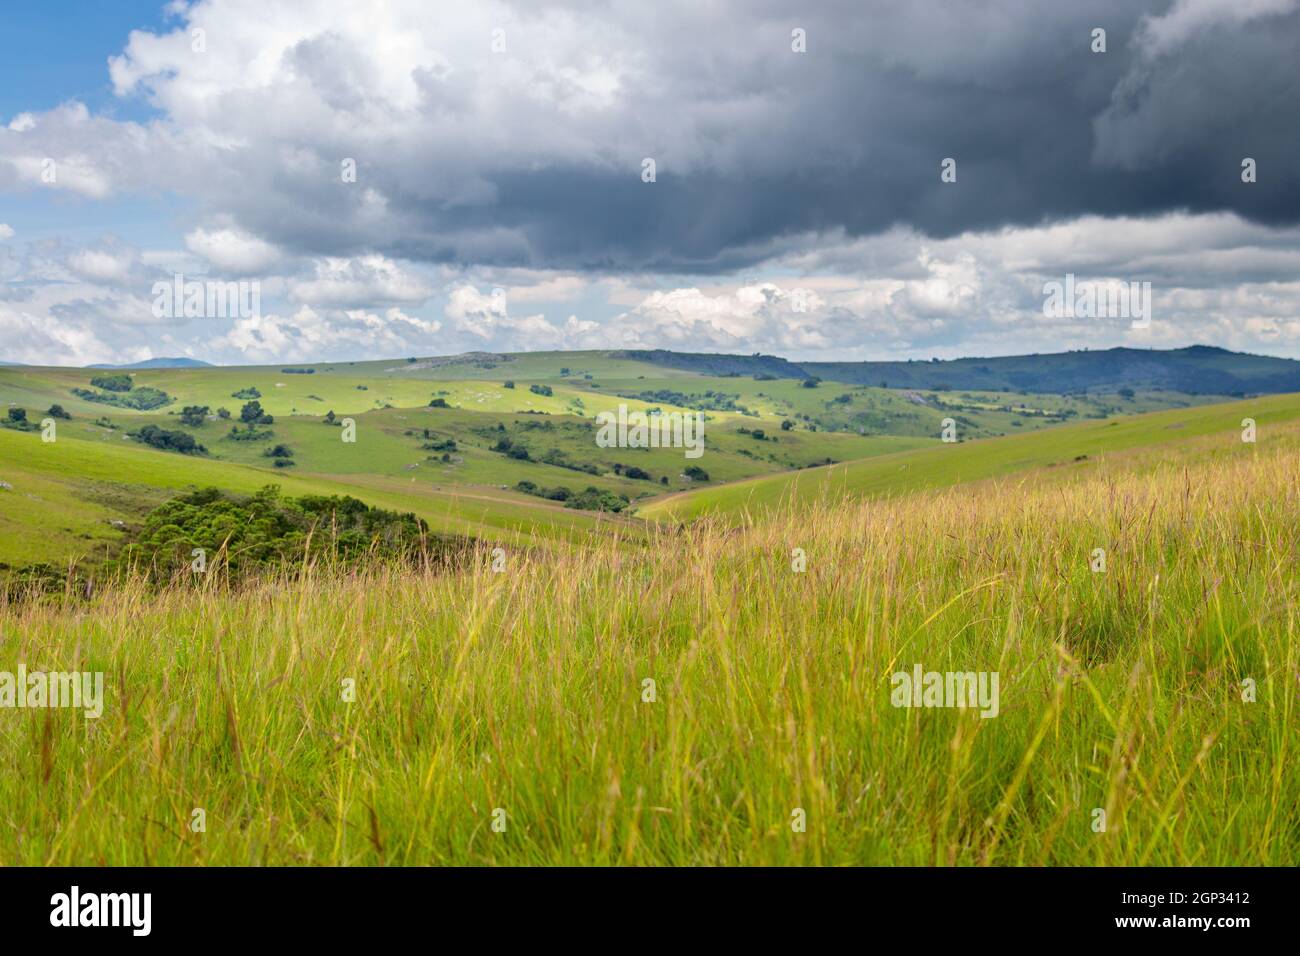 Dramatic landscape and rolling hills under thunderstorm clouds in Nyika National Park in Malawi, Africa Stock Photo